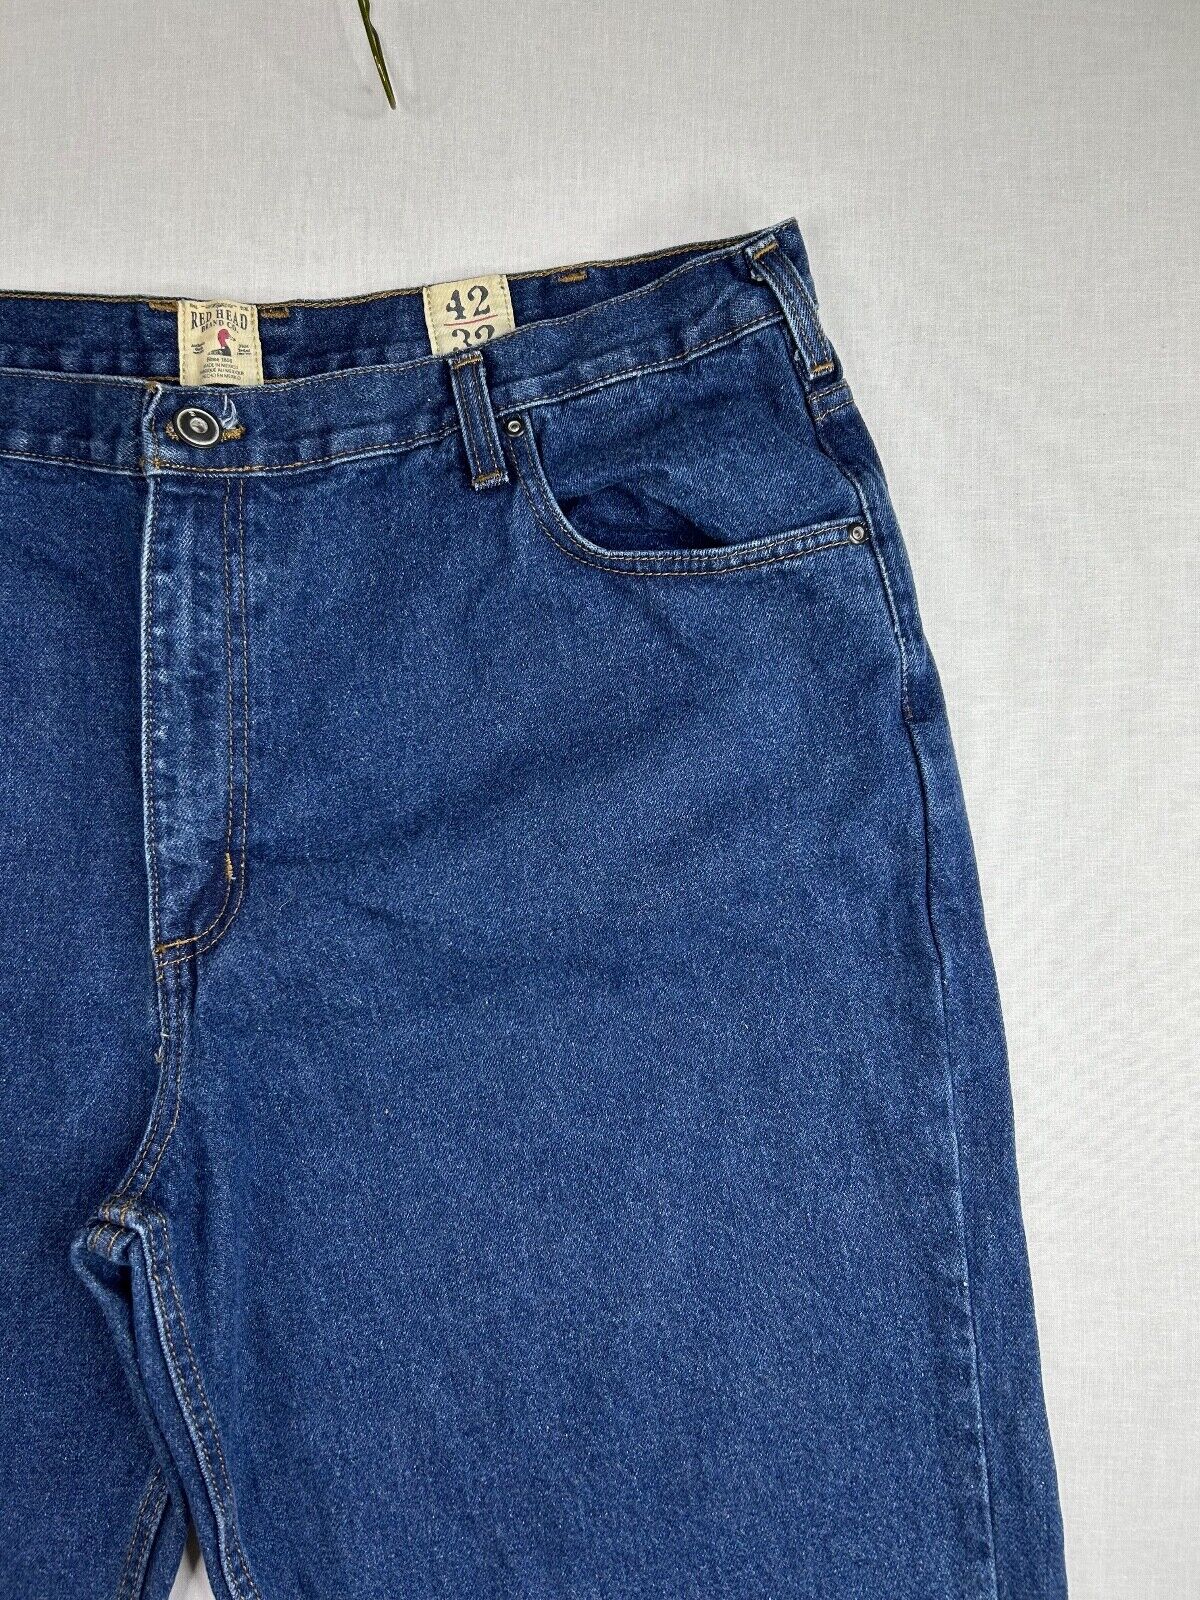 Red head jeans size 42 men 42x31 blue tapered dar… - image 2